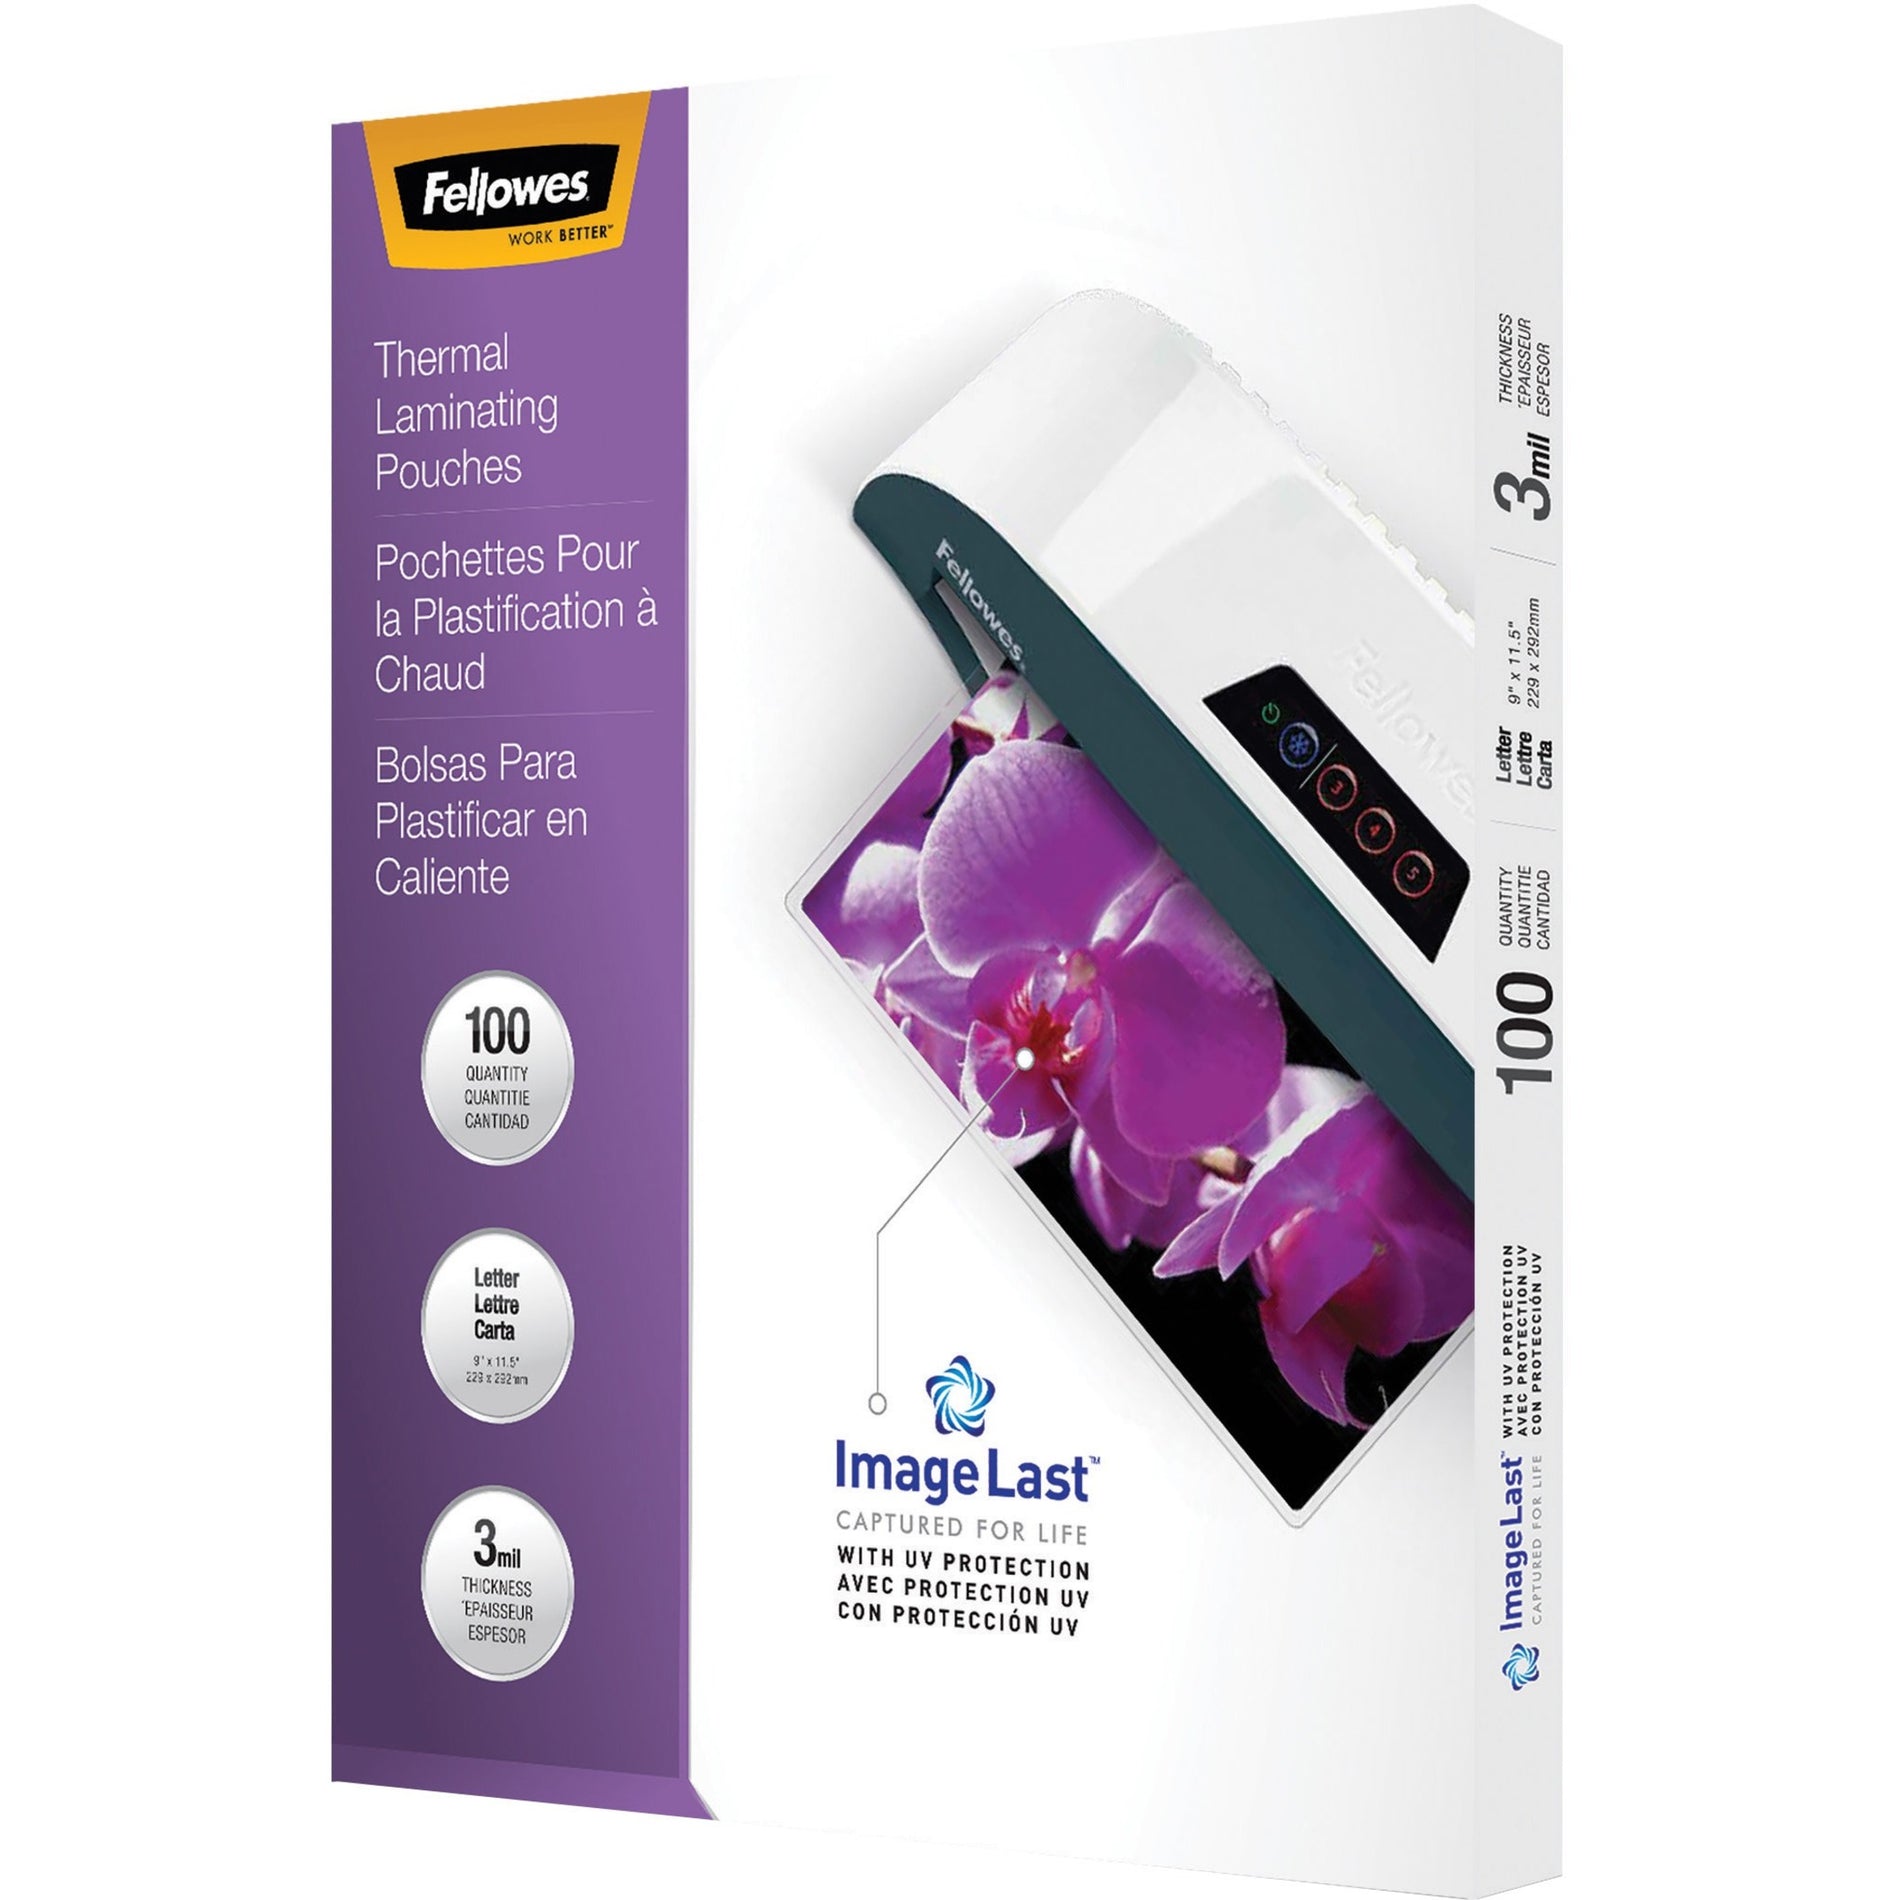 Fellowes 52454 ImageLast Thermal Laminating Pouches, Jam-free, Durable, UV Resistant, Fade Resistant, Type G - Glossy, Clear, 100 / Box